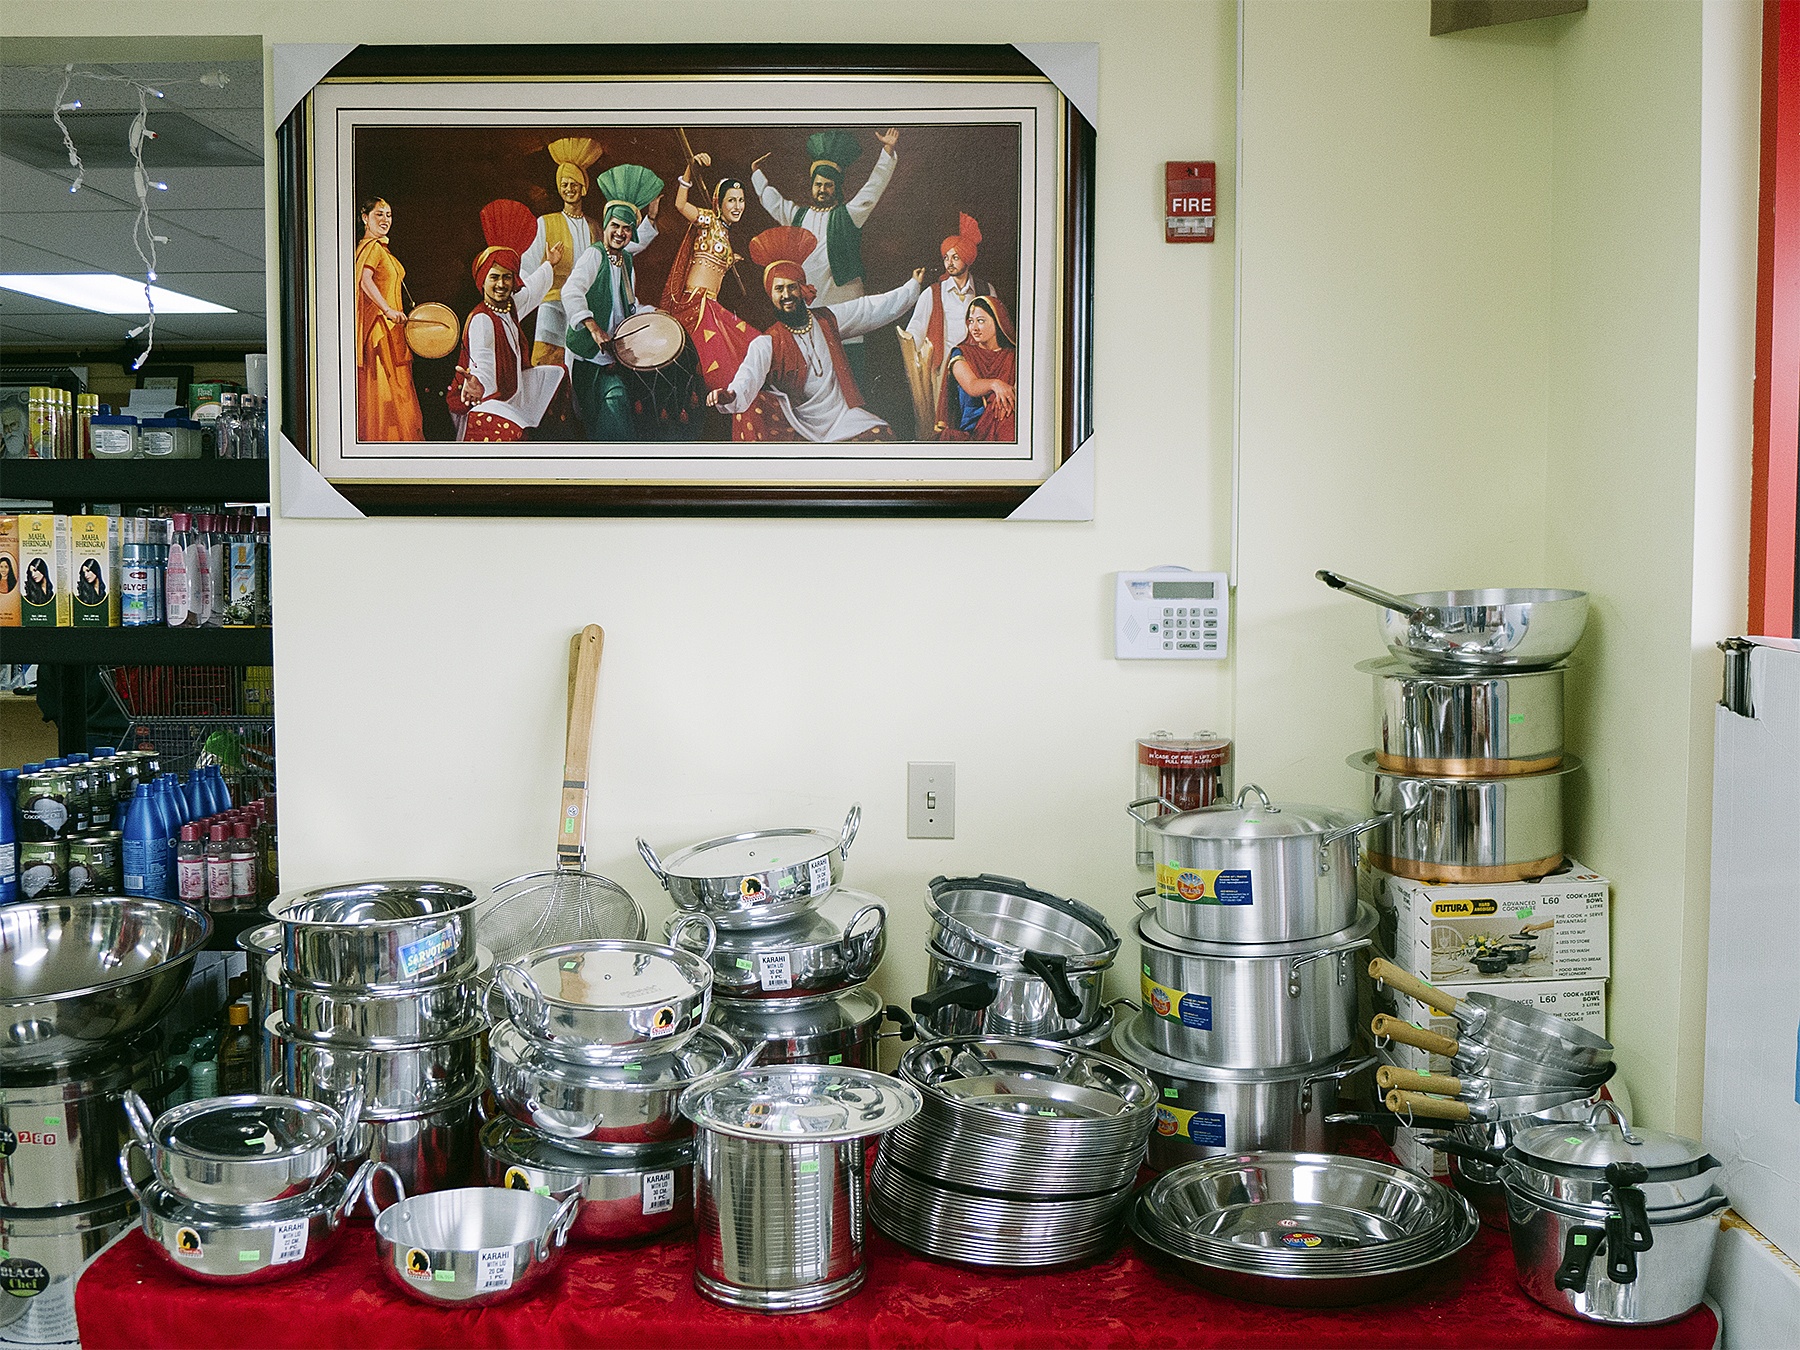 Cookware and art at India Plaza. Photo by Sofia Lee